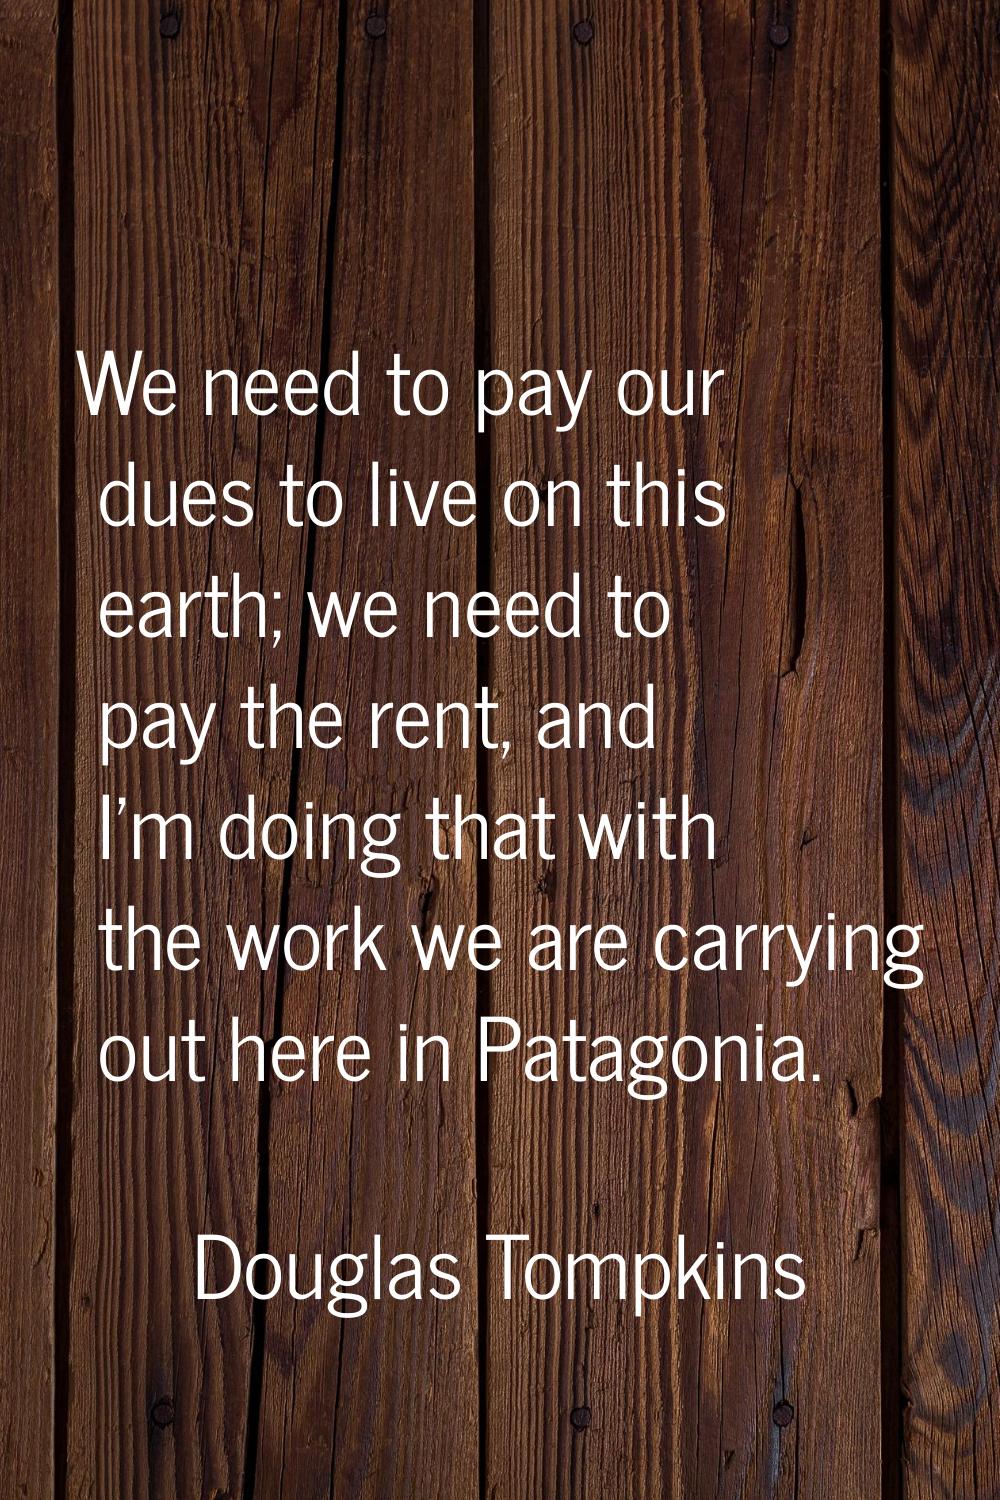 We need to pay our dues to live on this earth; we need to pay the rent, and I'm doing that with the